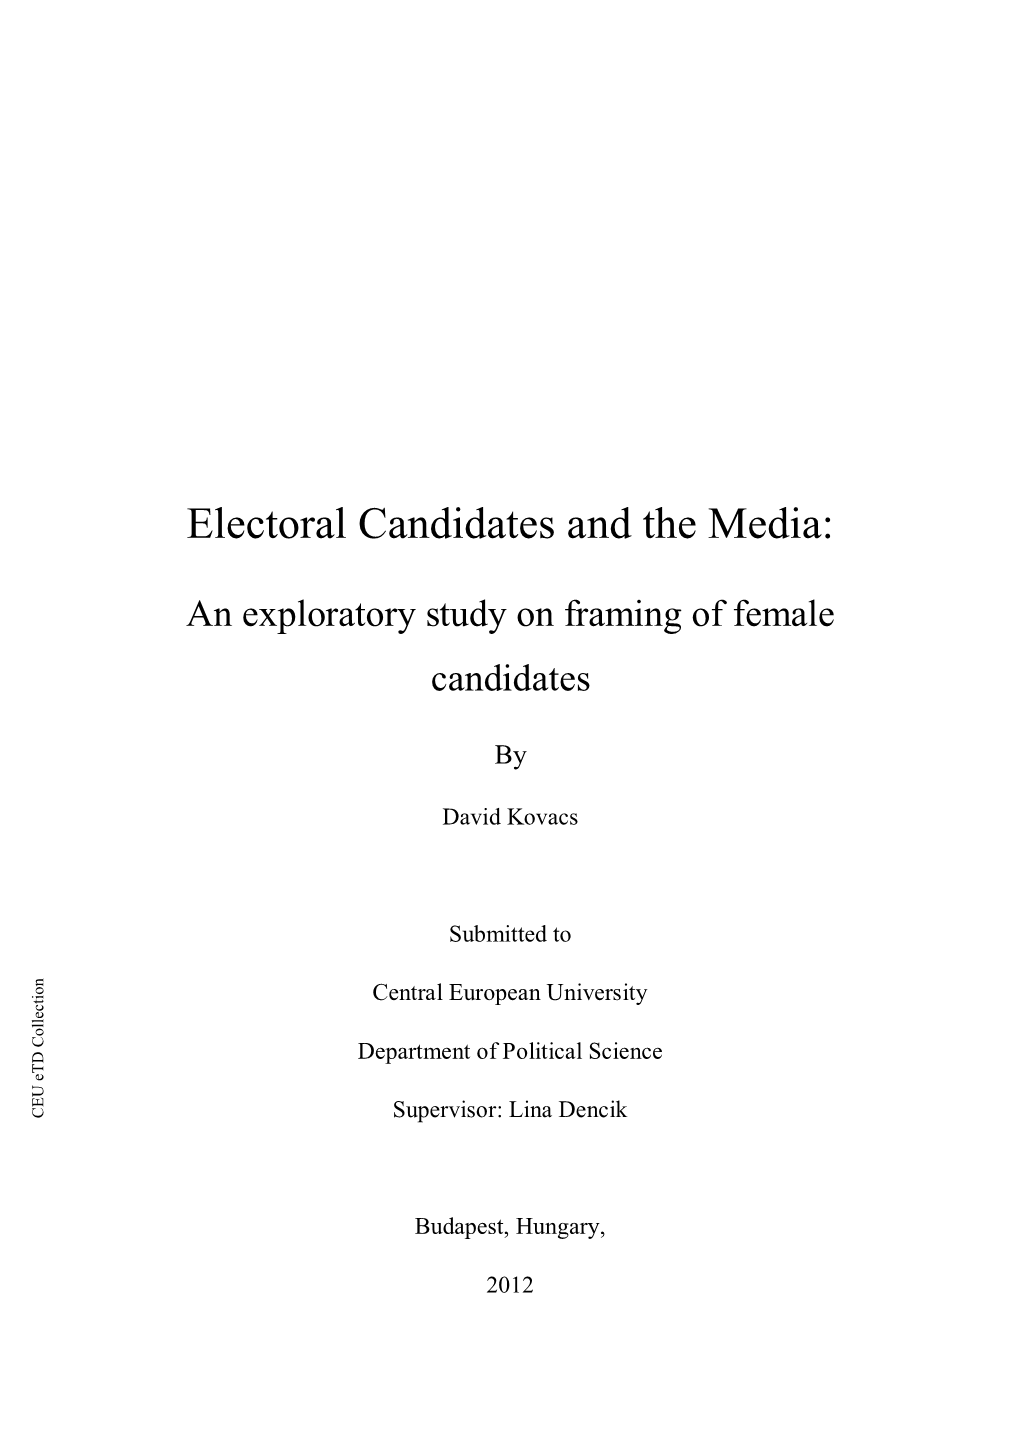 Political Candidates and the Media